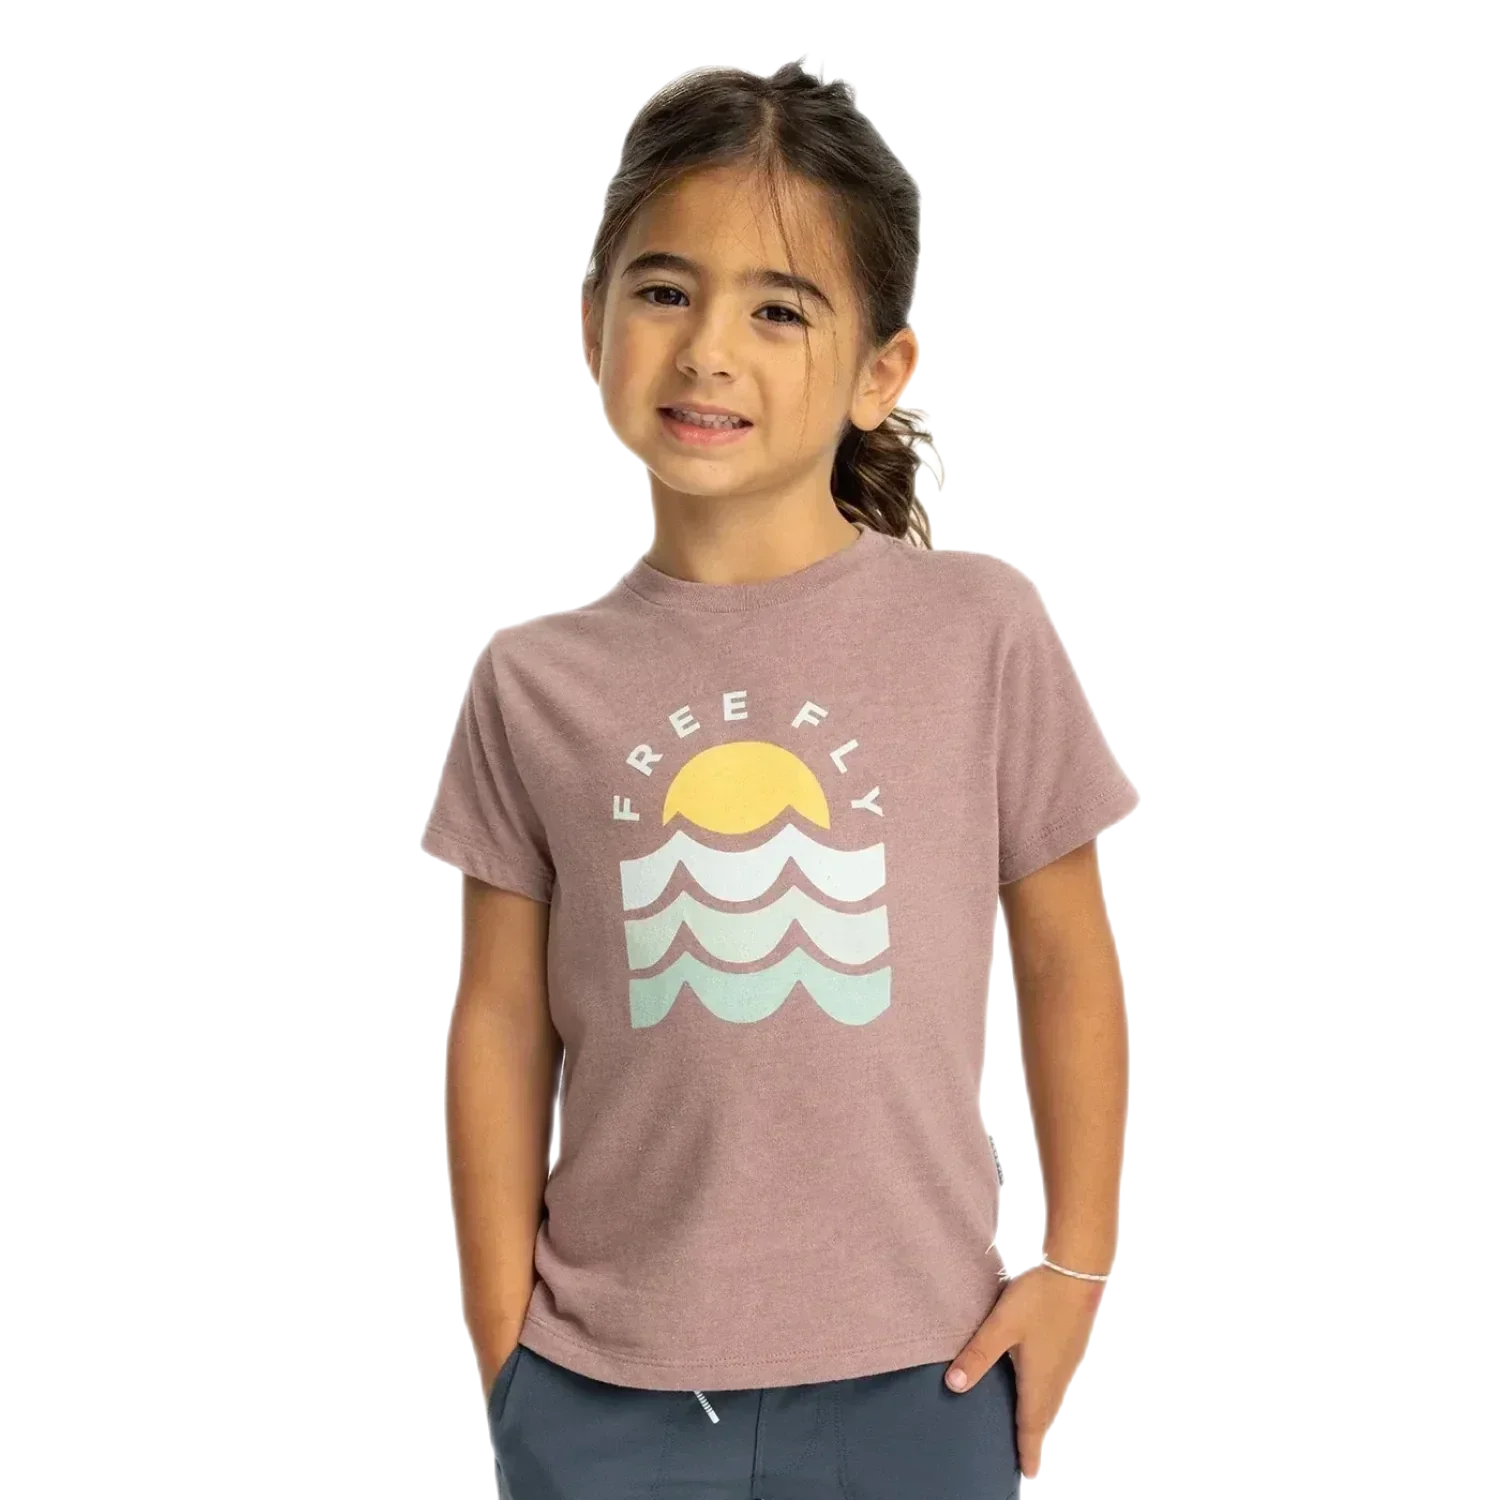 Free Fly Apparel KIDS|BABY - BABY - BABY TOPS Toddler Perfect Day Tee HEATHER FIG